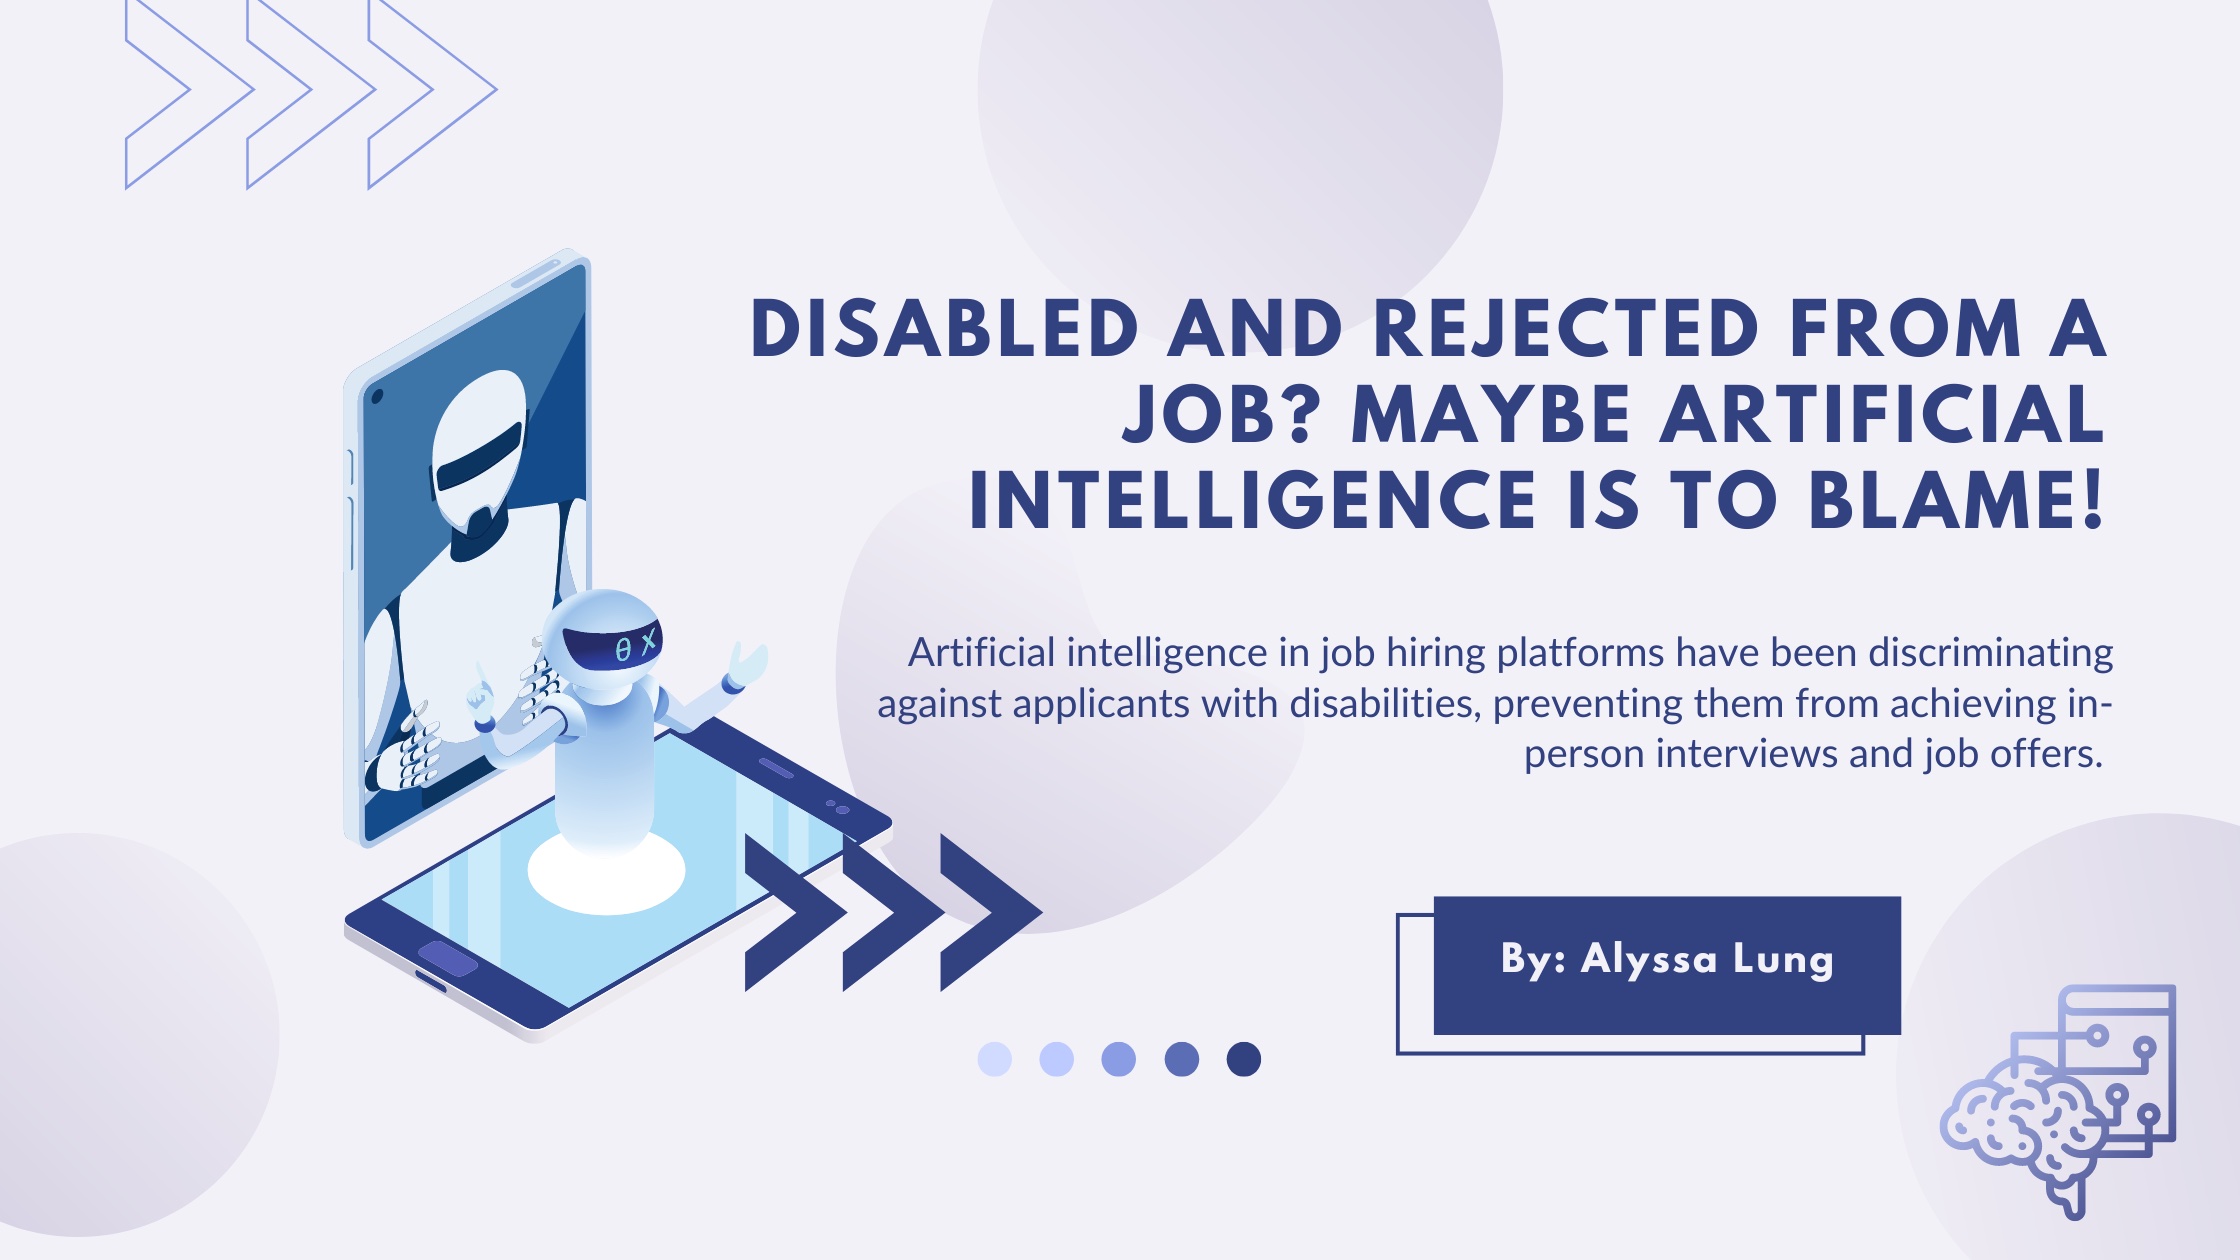 Disabled and Rejected from a Job?  Maybe Artificial Intelligence is to Blame!  Artificial Intelligence in job hiring platforms have been discriminating against applicants with disabilities, preventing them from achieving in-person interviews and job offers.  By Alyssa Lung